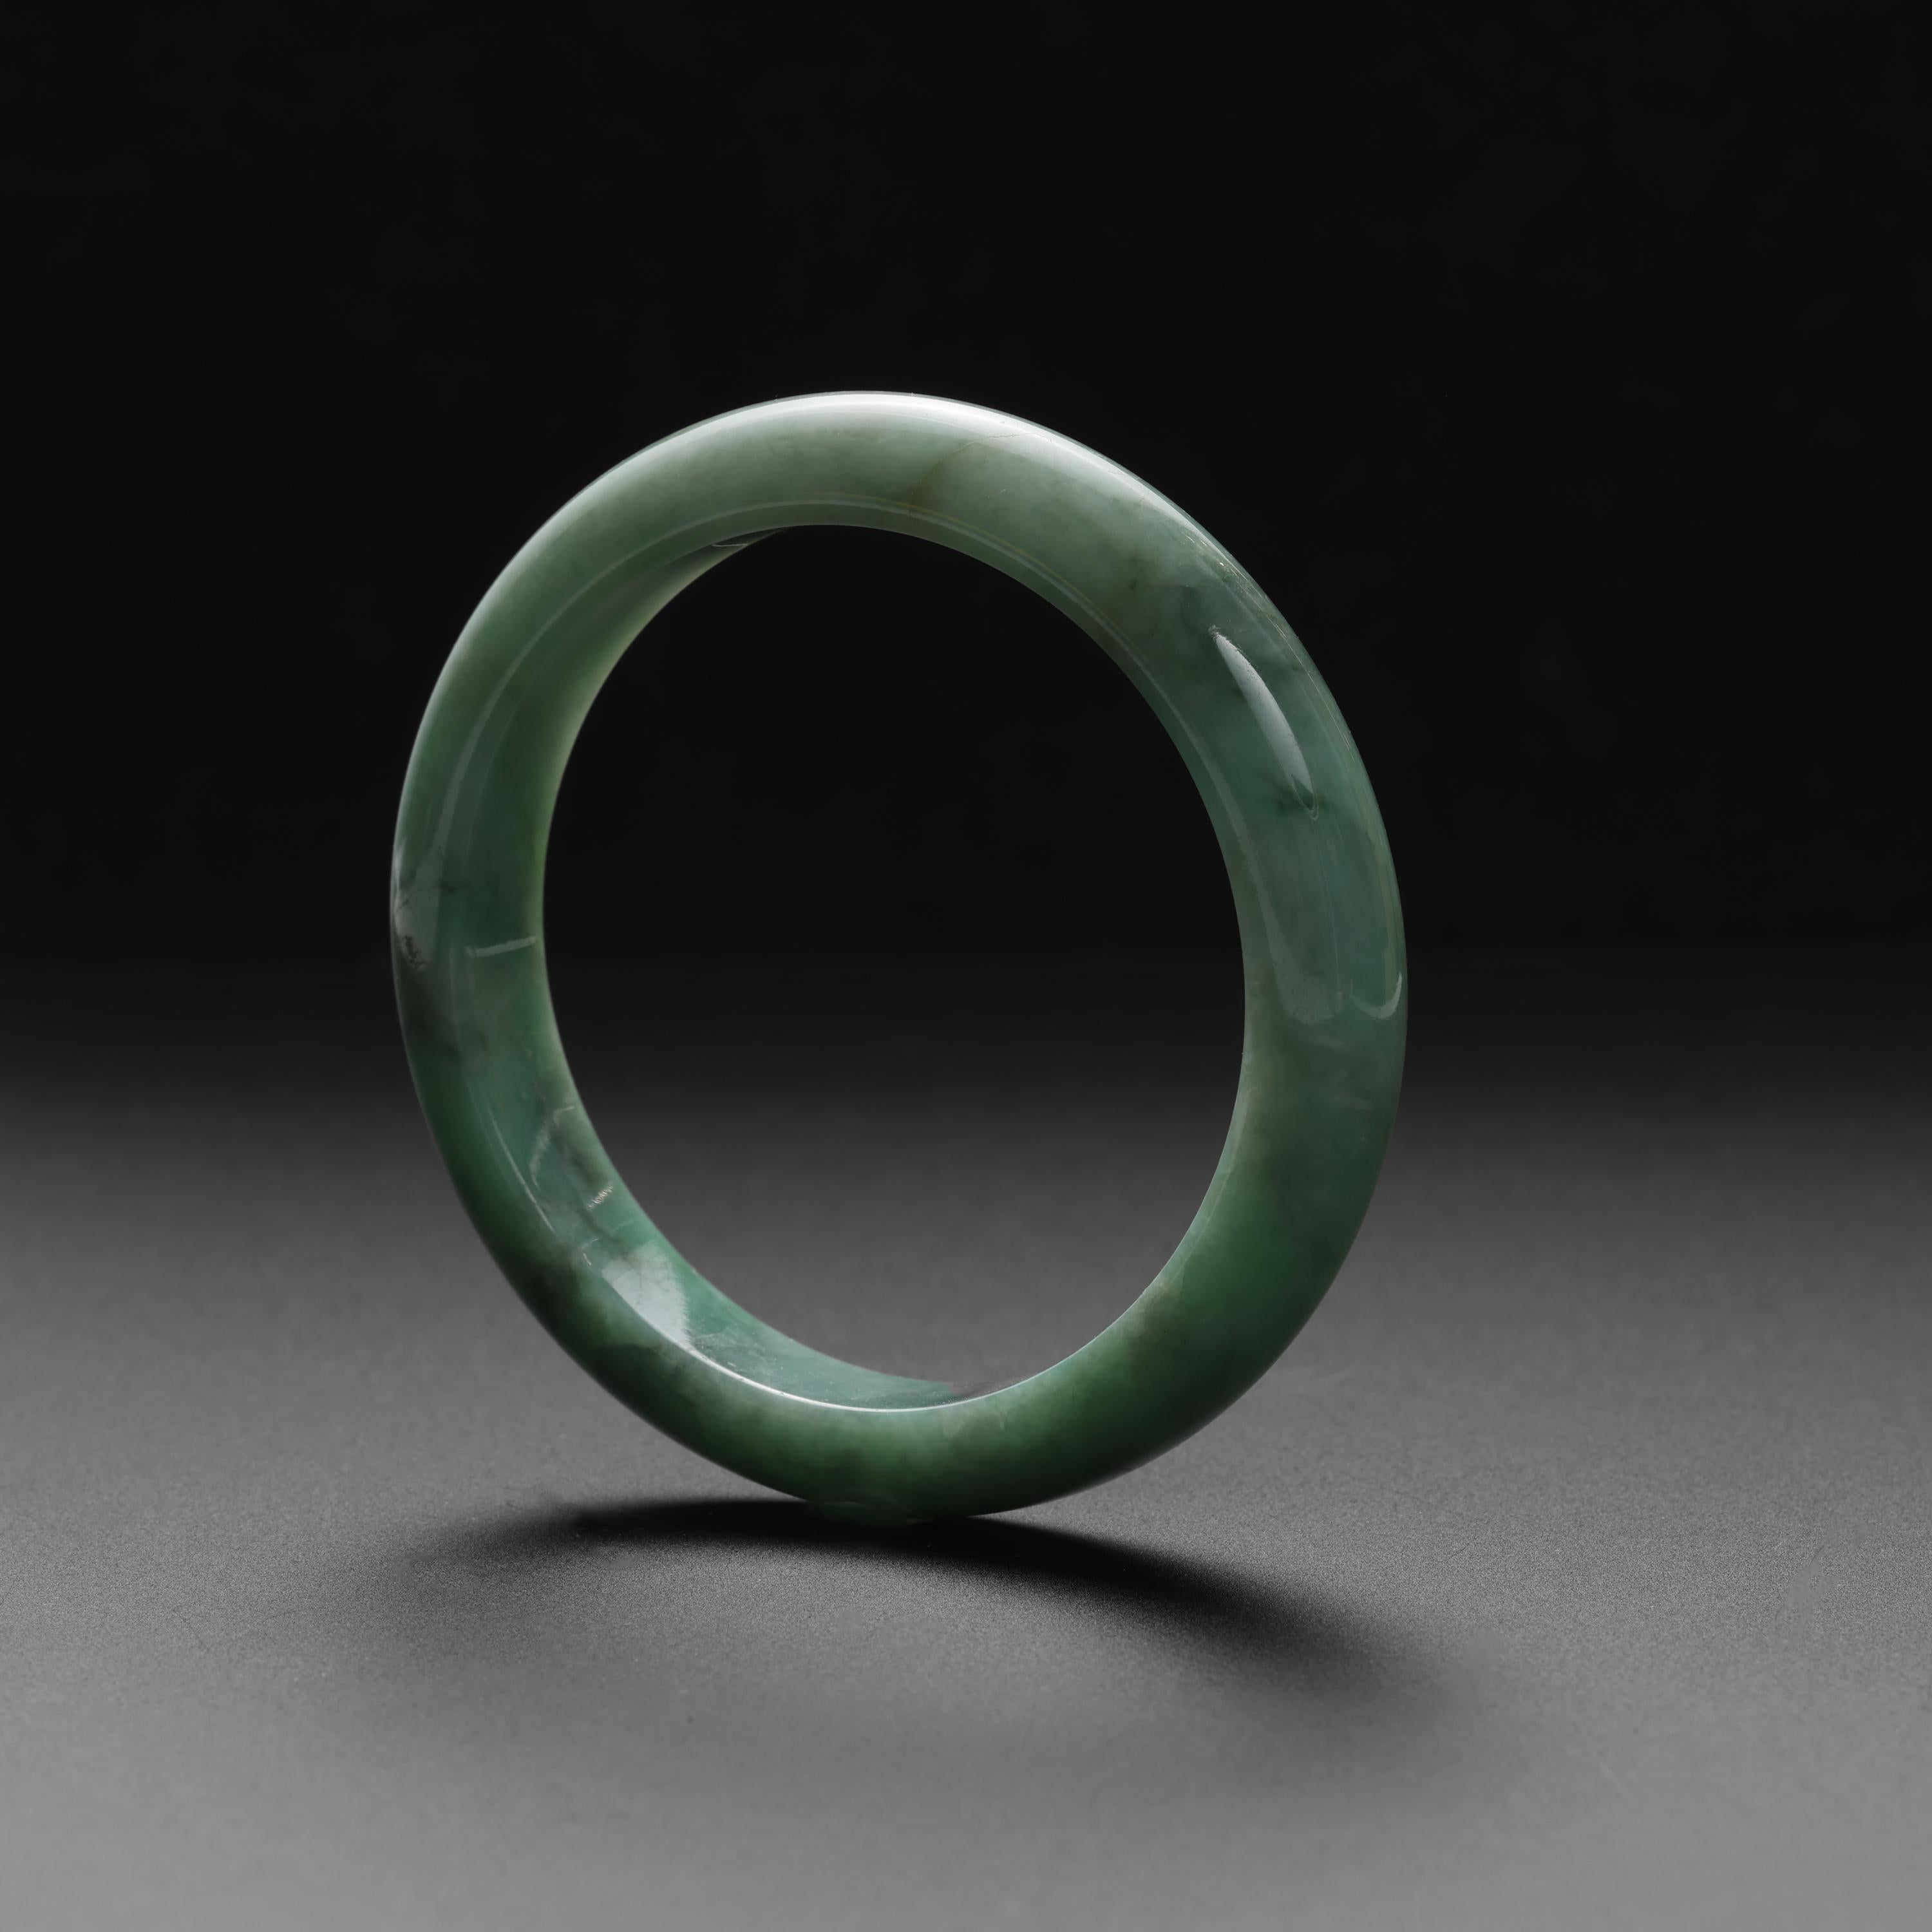 This gleaming certified natural and untreated Burmese jadeite jade bangle has an inner diameter of 55.4mm. The bangle is a mottled light apple green color and displays beautiful grain. The 